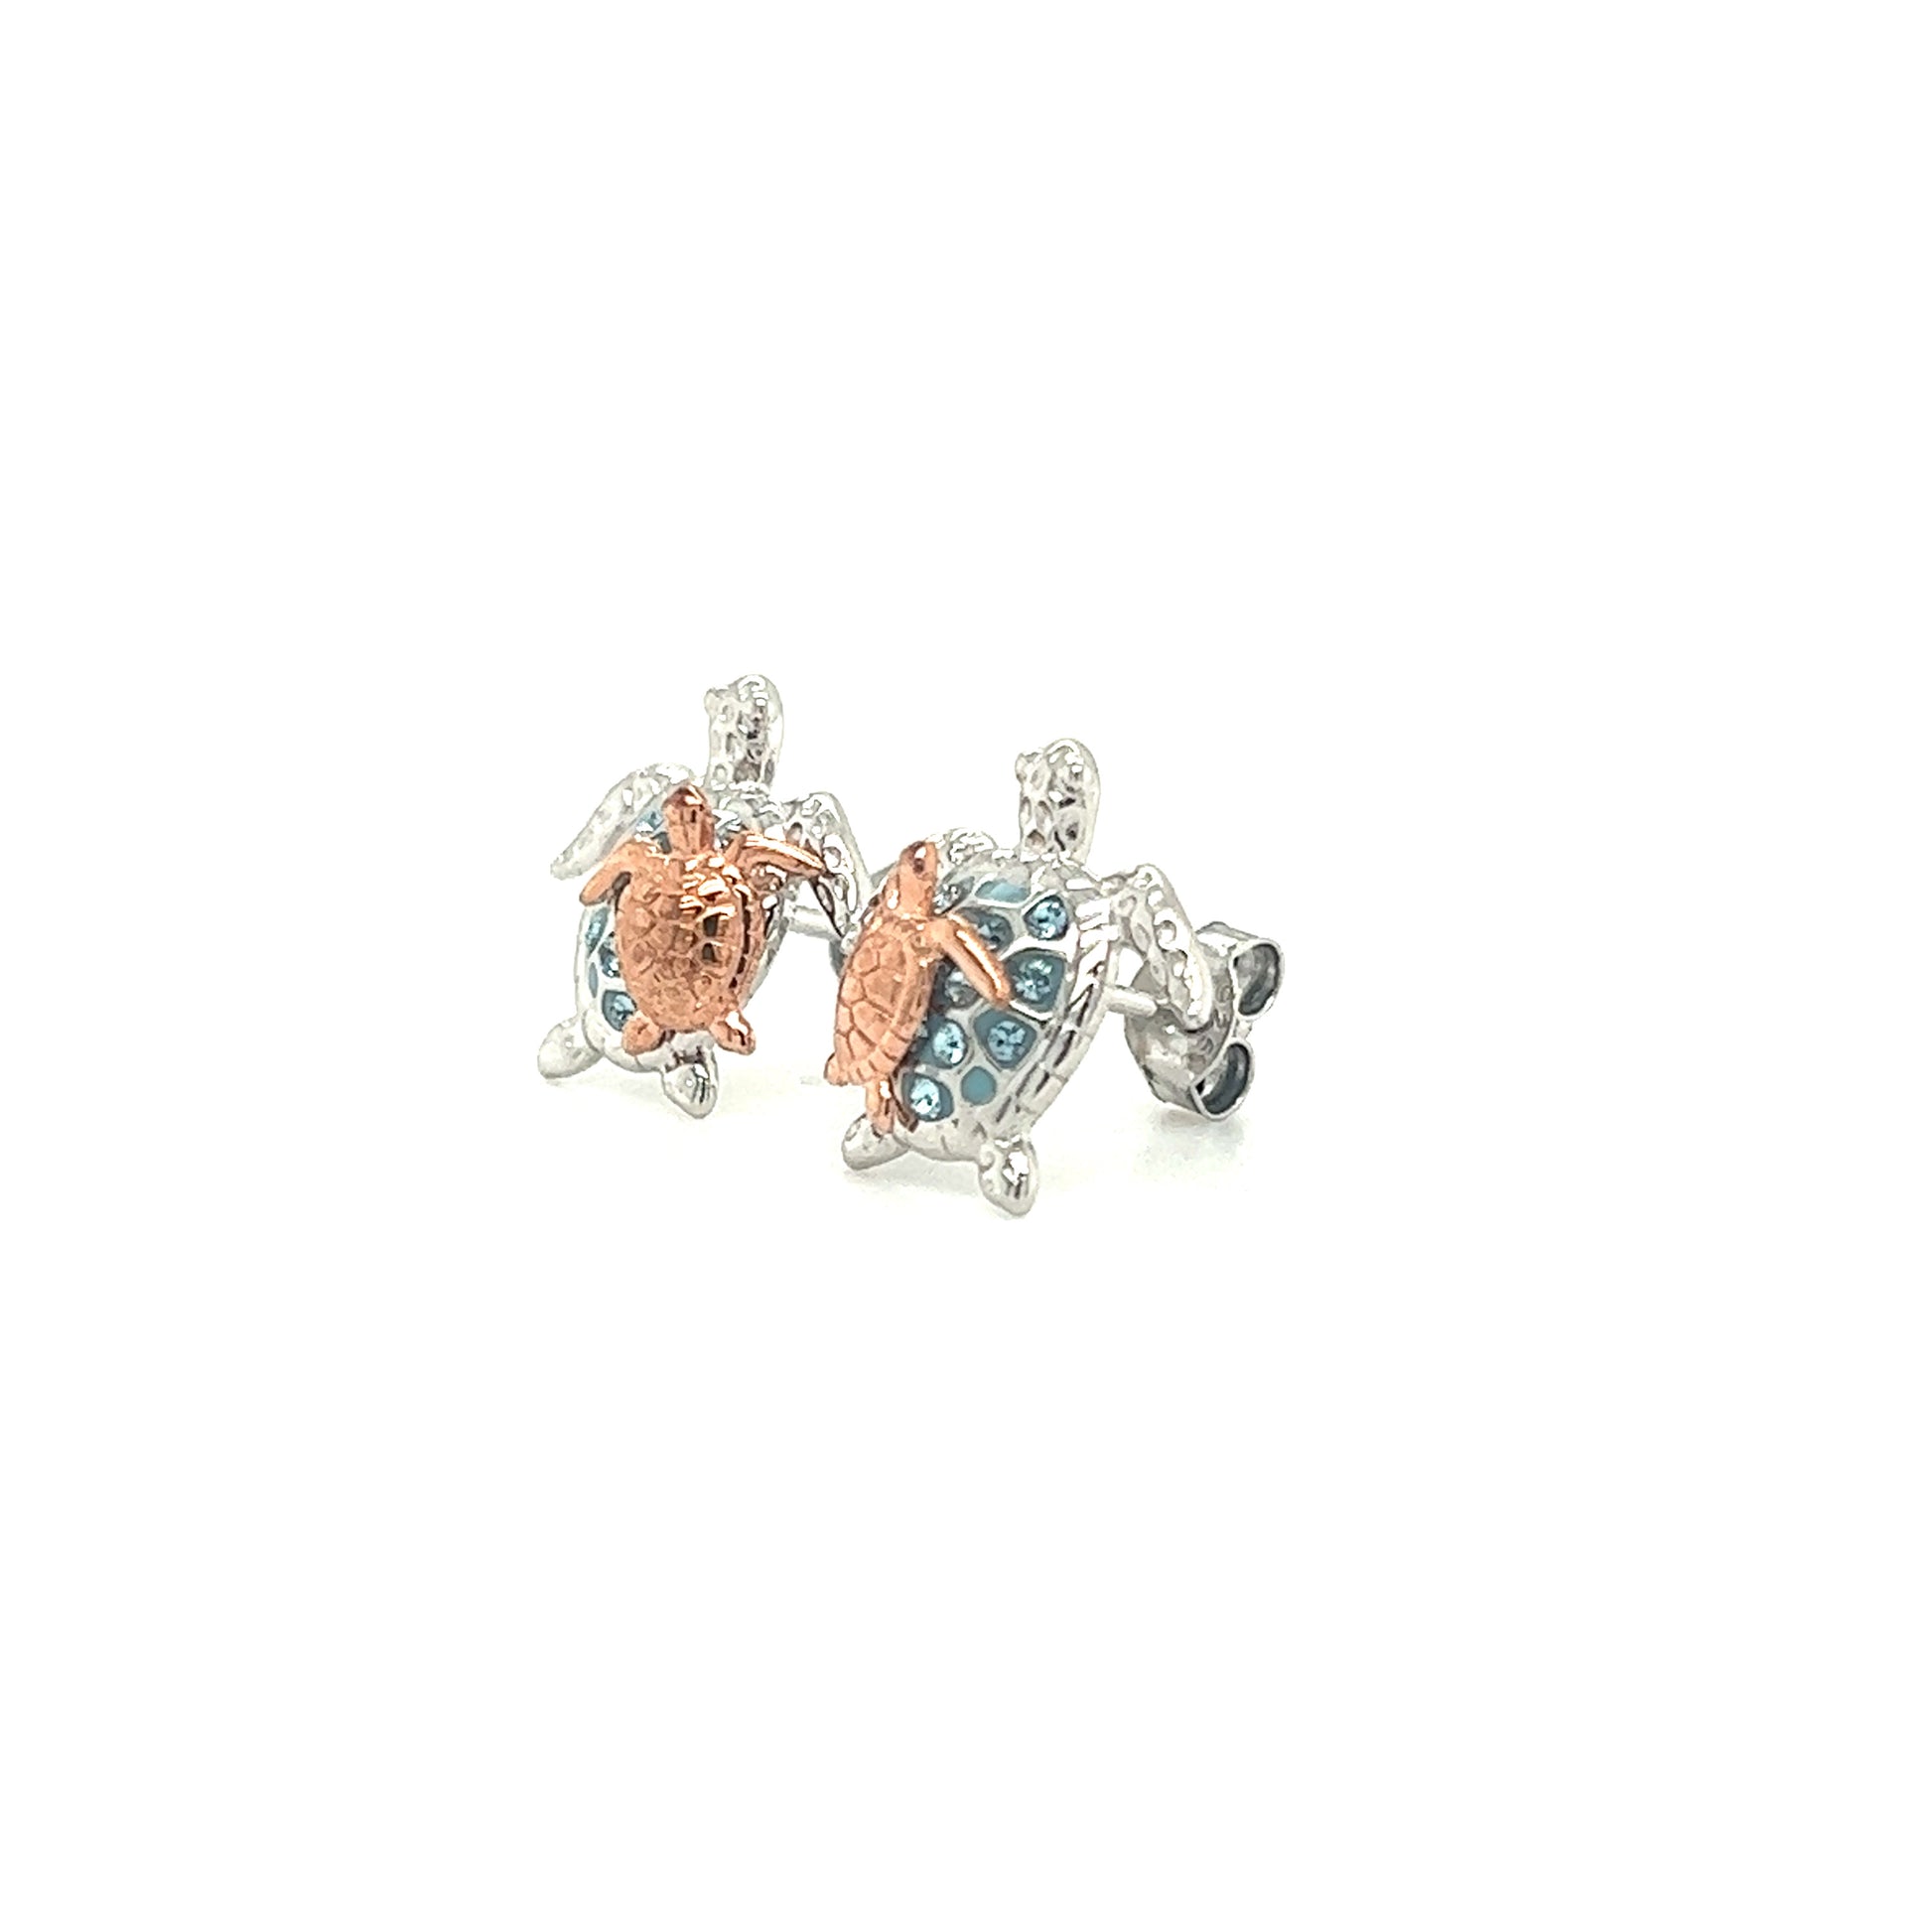 Sea Turtle Stud Earrings with Rose Gold Accents and Aqua Crystals in Sterling Silver Right Side View